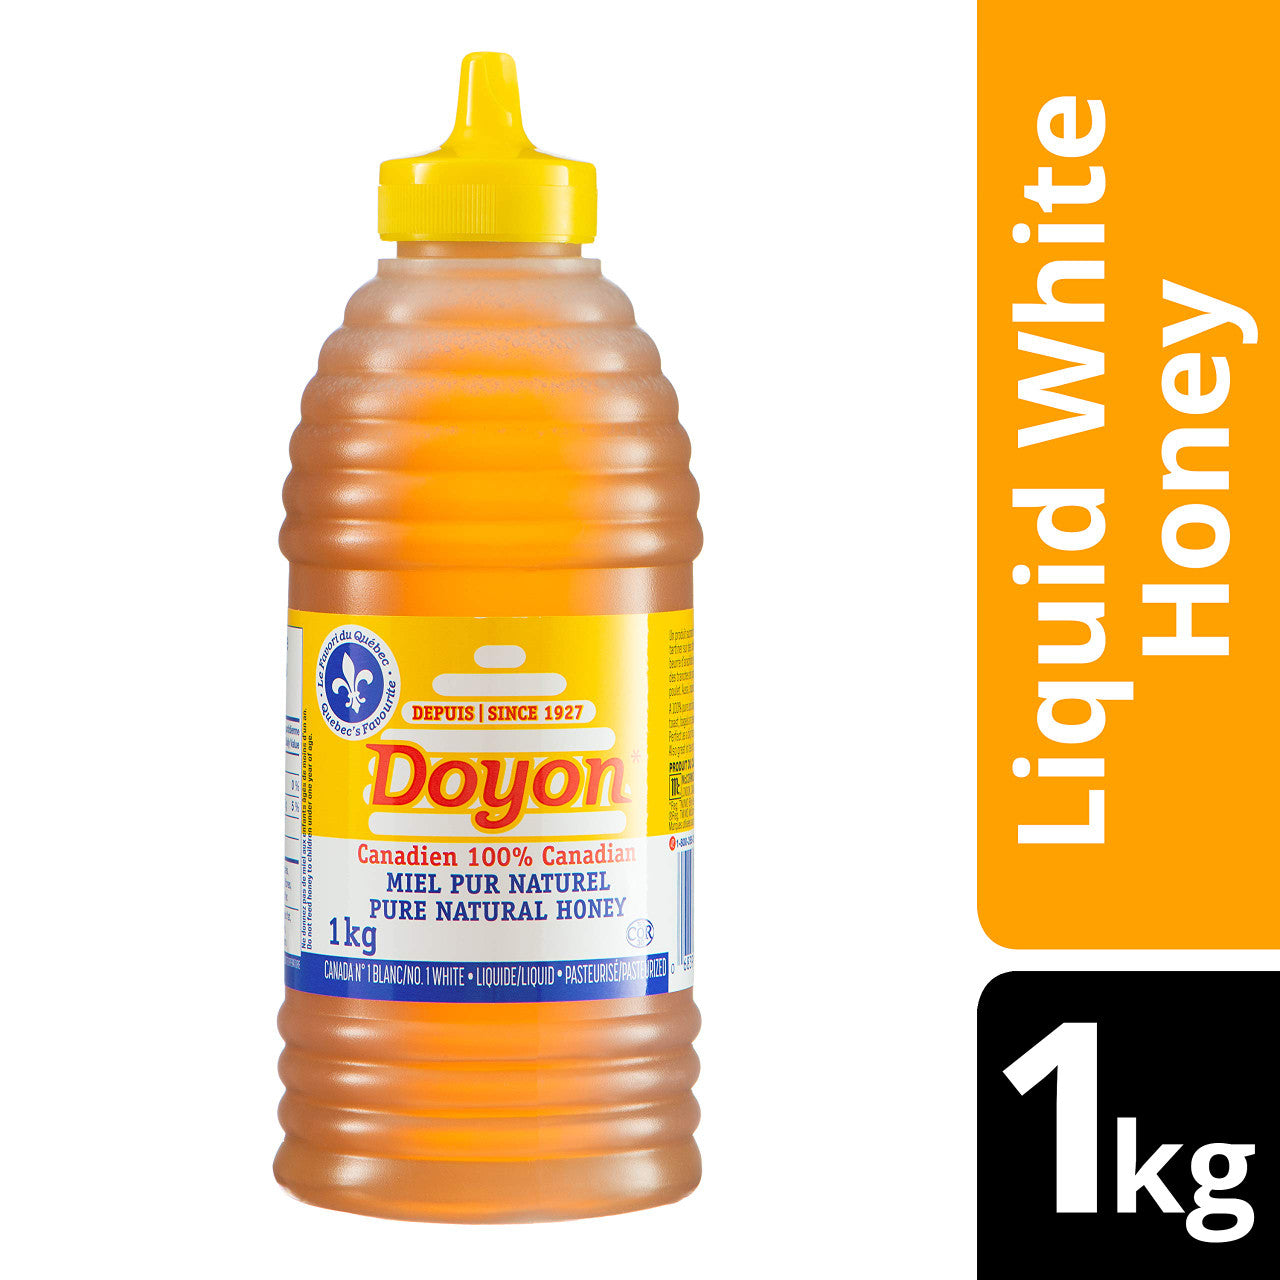 Doyon Honey Liquid White Squeeze Beehive,1kg/2.2 lbs.{Imported from Canada}